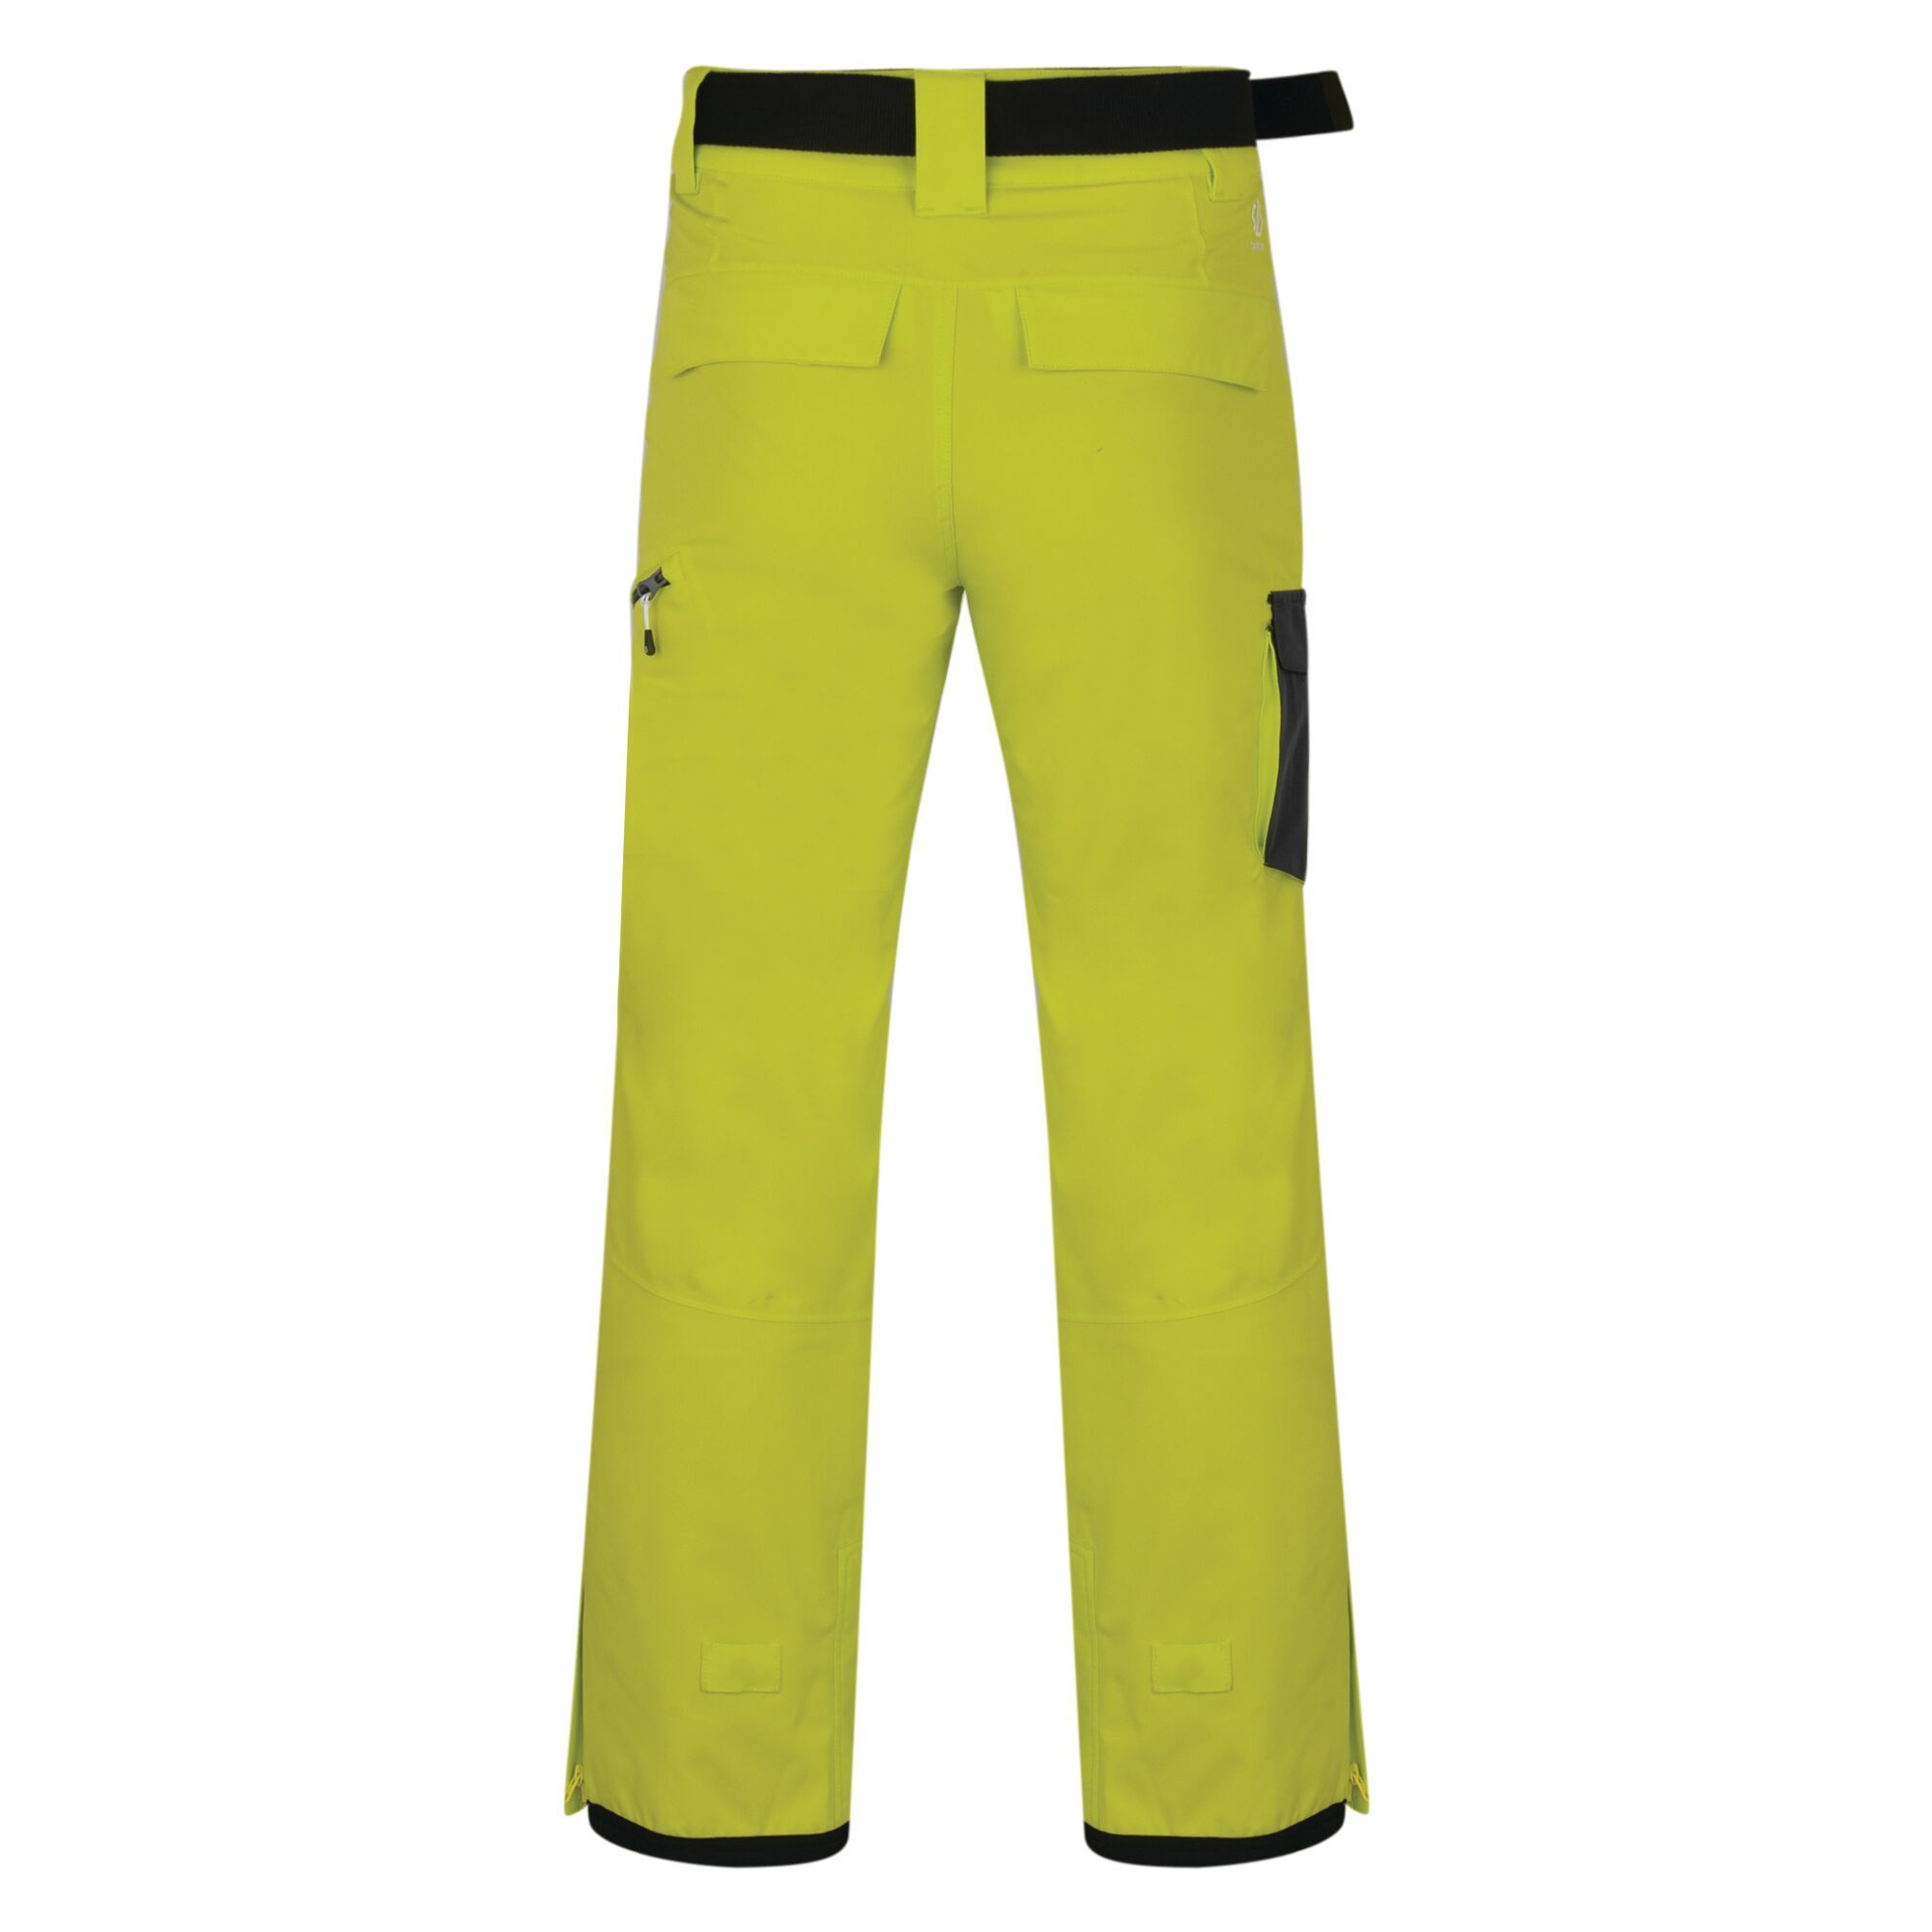 Material: polyester: 100%. Waterproof and breathable Ared V02 20000 polyester 4-way stretch fabric. Durable water repellent finish. Taped seams. High loft polyester insulation. Warm touch lining to upper legs. Waist belt with metal buckle fastener. Multiple pockets including zipped pockets. Articulated knee design. Reinforced self fabric overlay at inner ankle. Zip gusset at hem. Reinforced binding at hem. Tab up hem. Integral snow gaiters.